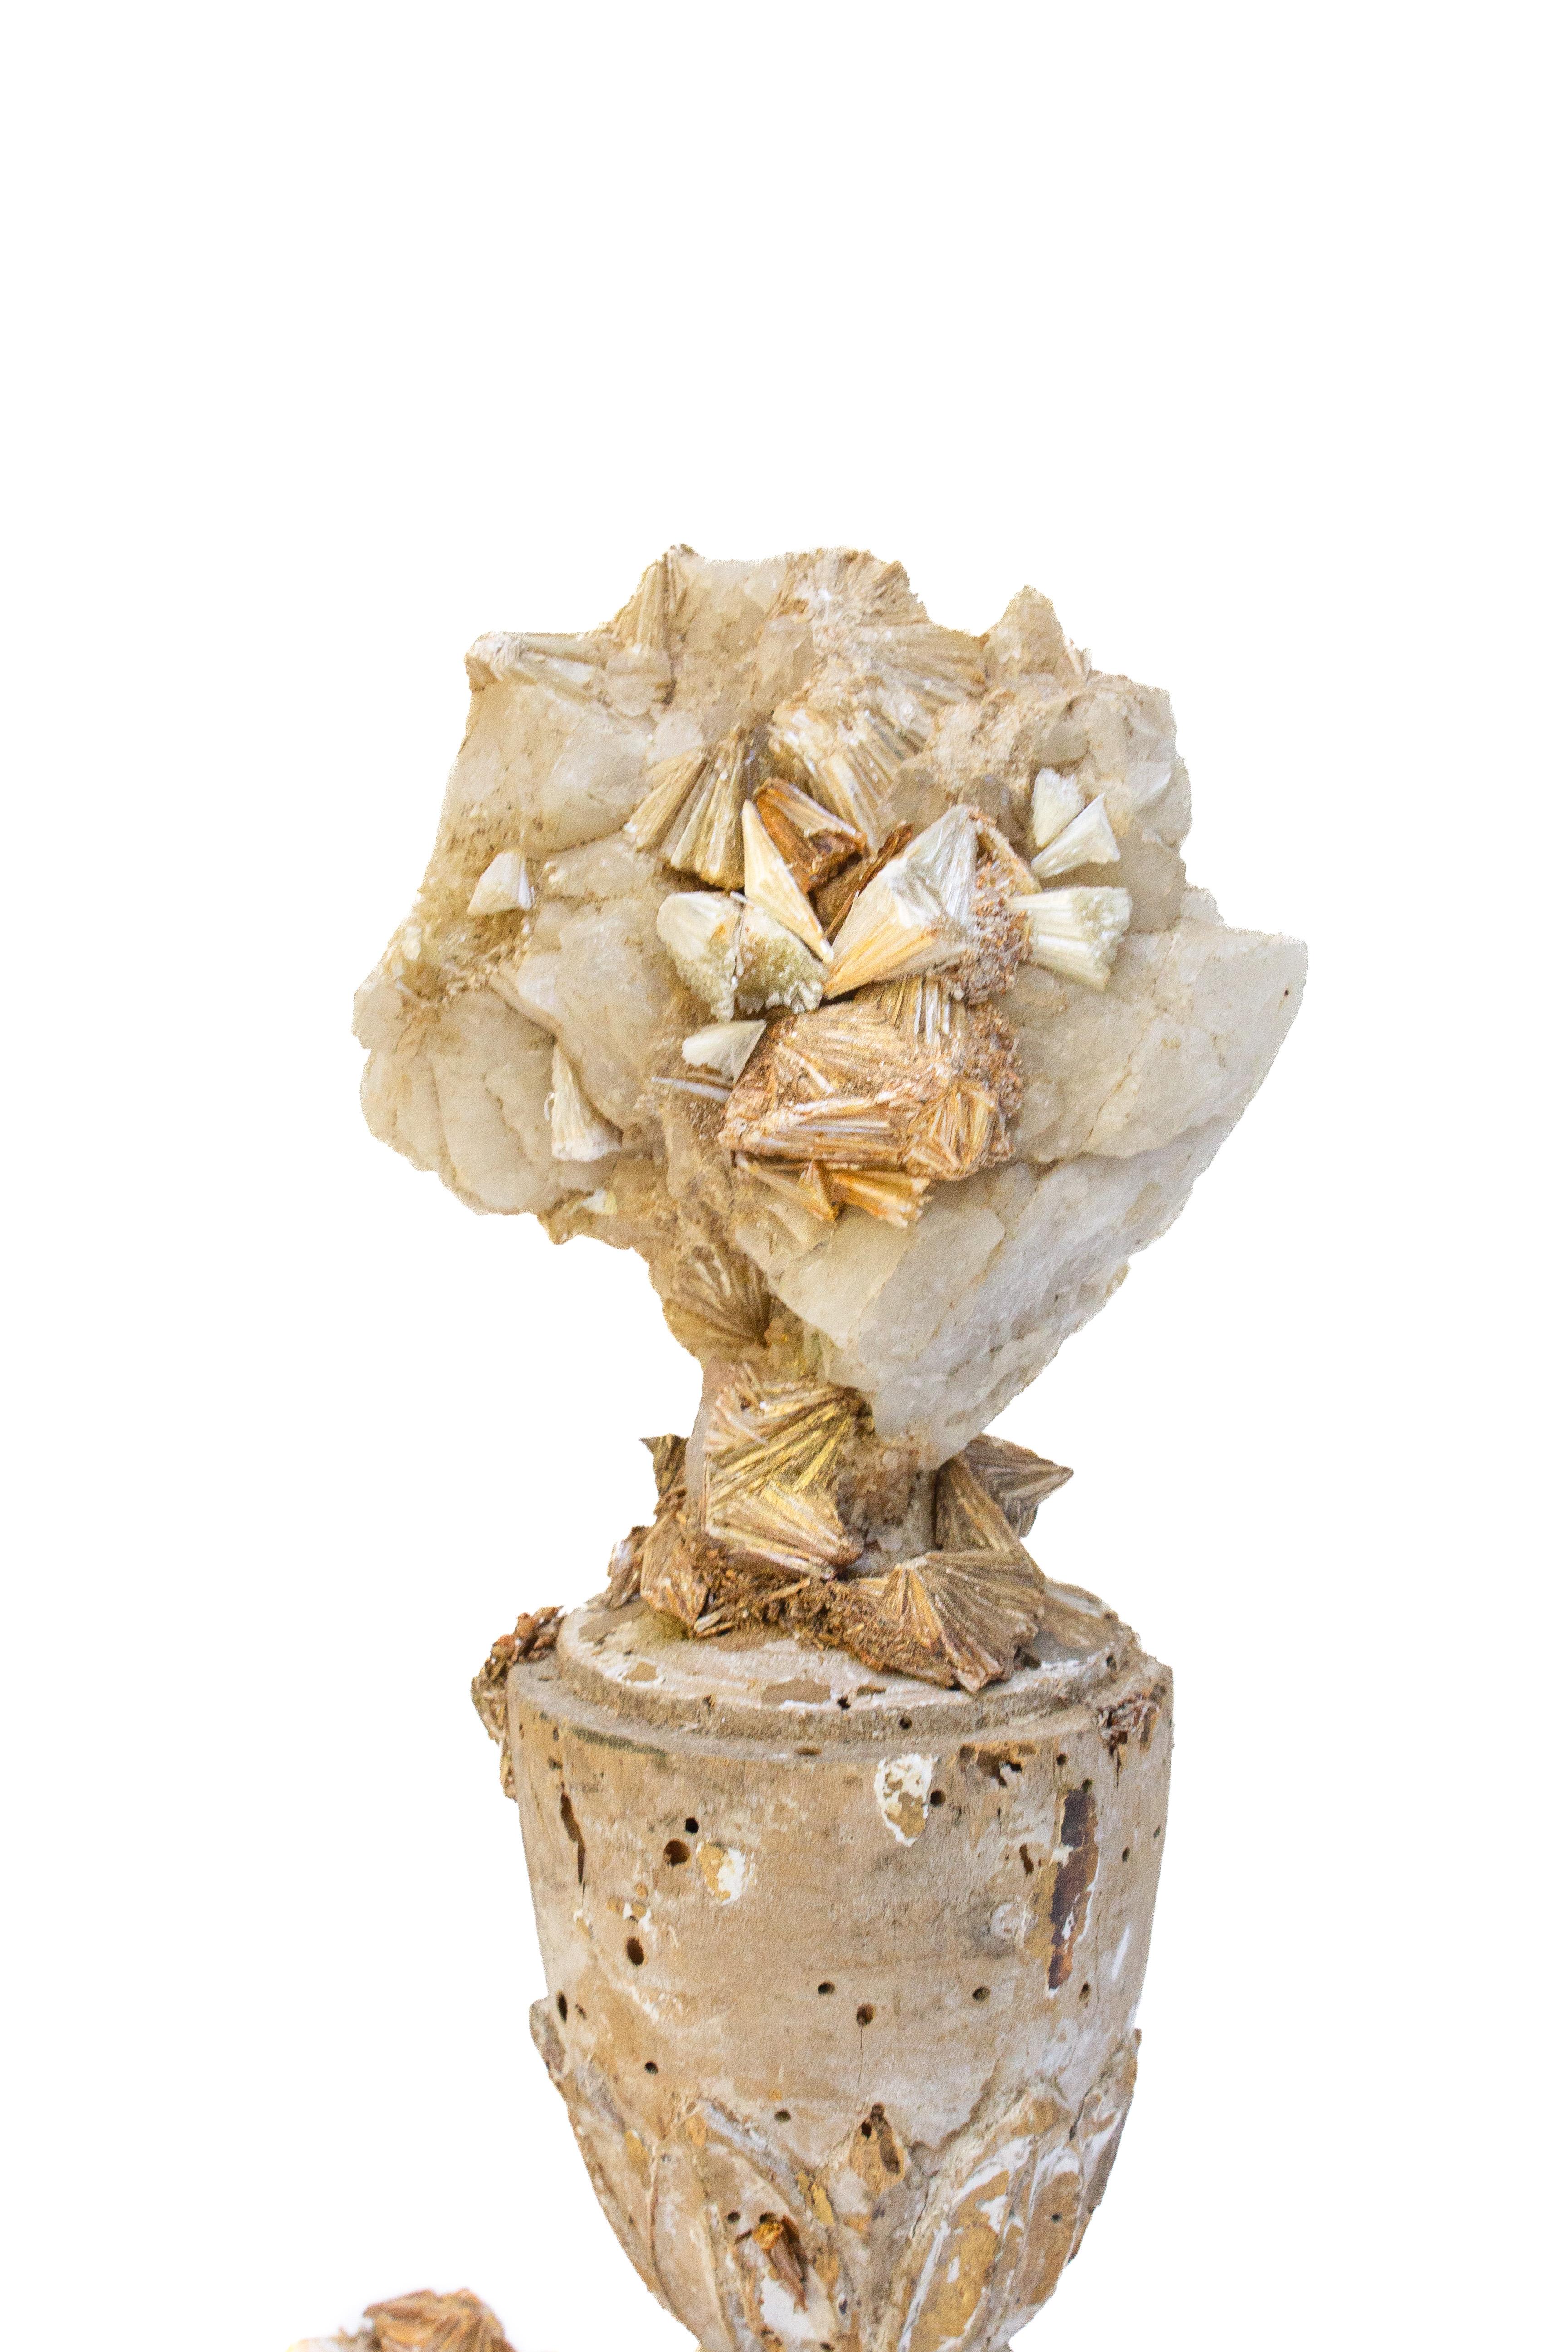 18th century Italian base mounted with pyrophyllite in a crystal quartz matrix on a pyrophyllite and quartz base.

This fragment is from a church in Florence, Italy. It was found and saved from the historic flooding of the Arno River in 1966. The